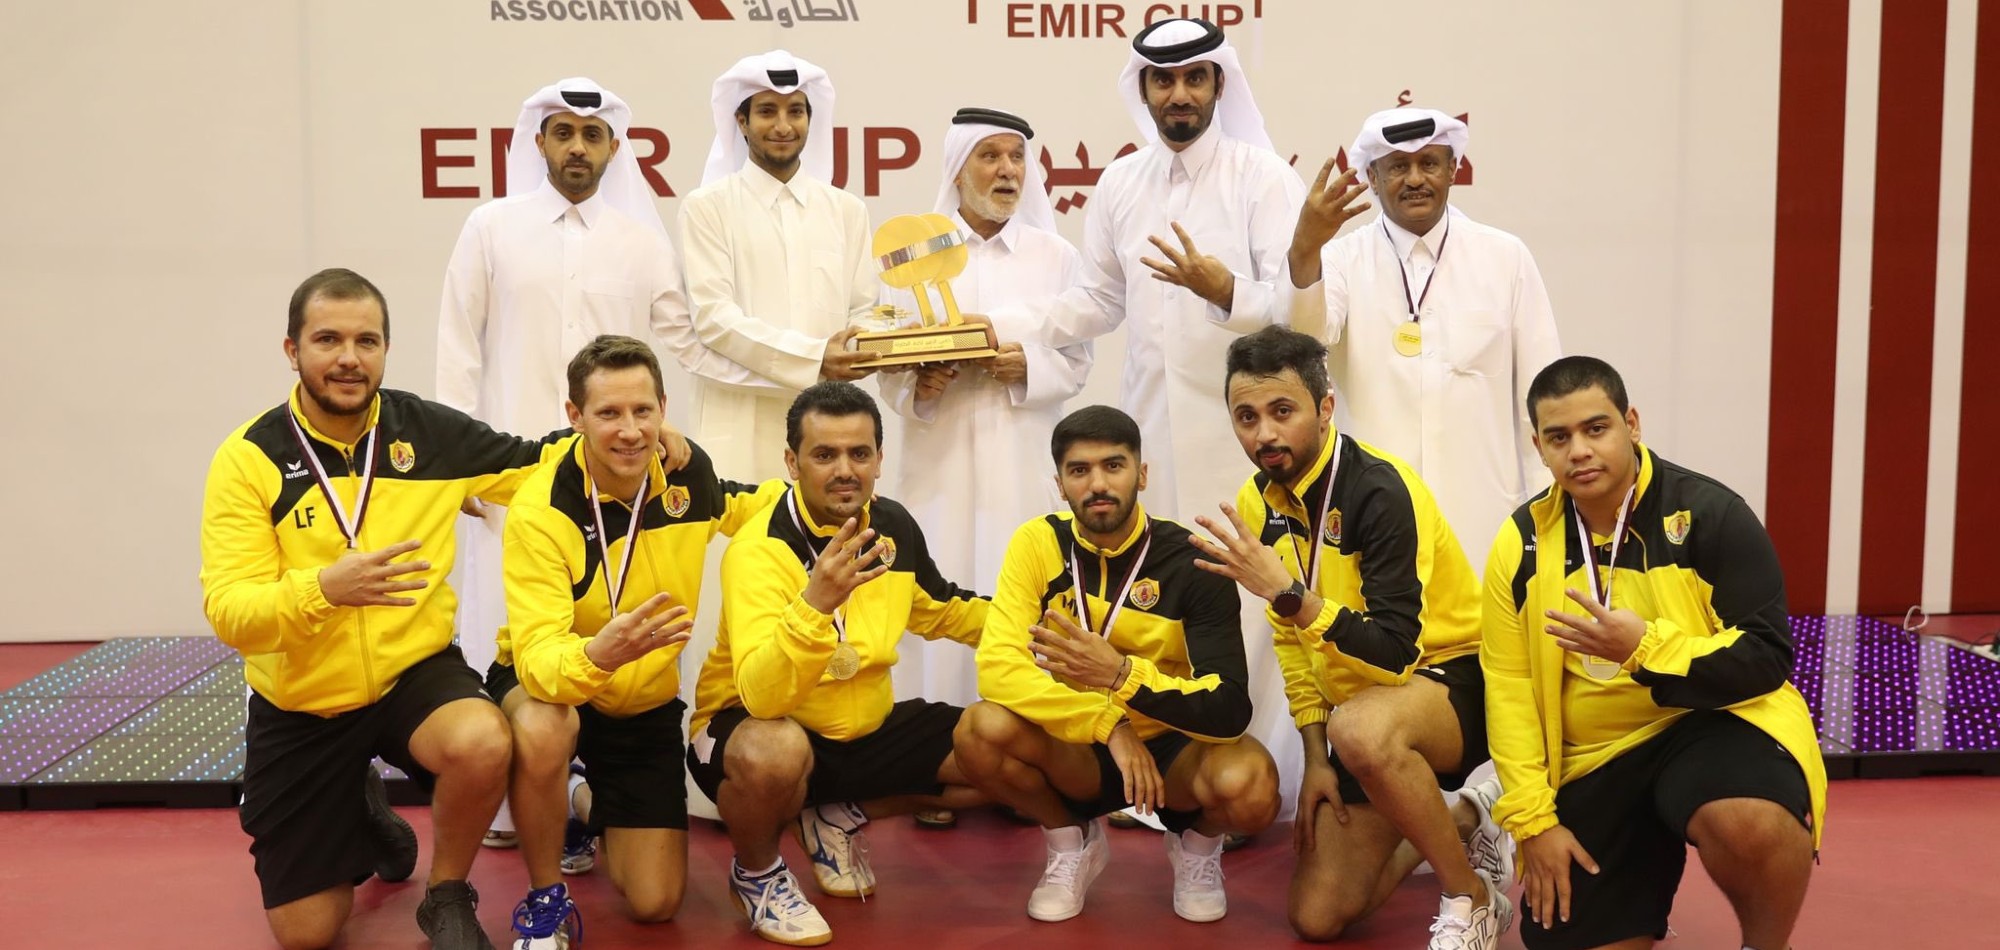 Qatar SC are crowned champions of the HH The Amir Table Tennis Cup